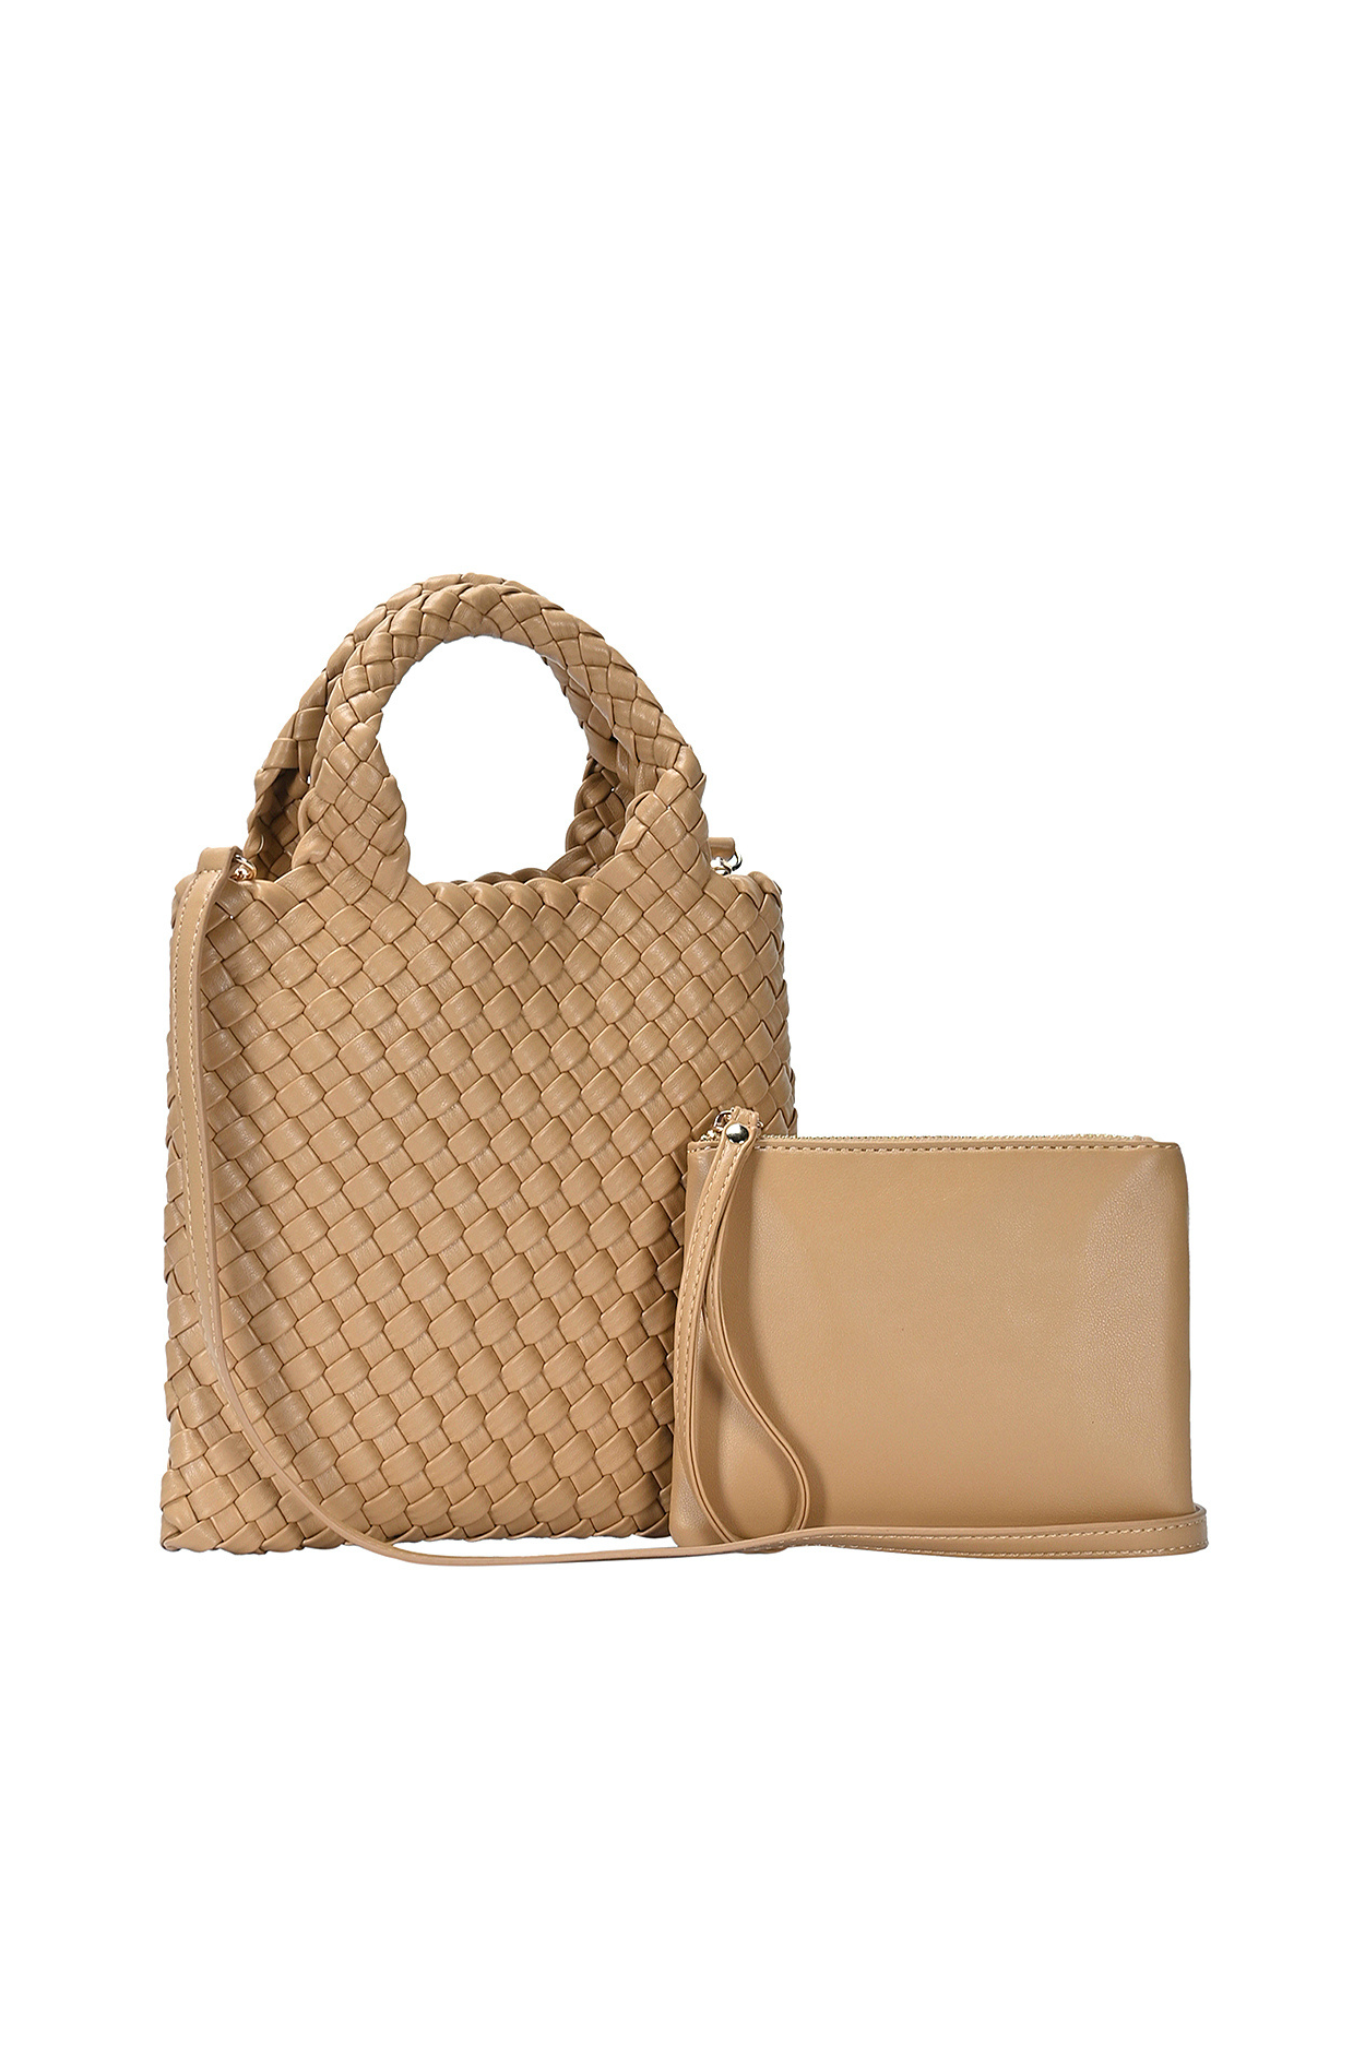 2 in 1 Woven Handle Tote Bag with Clutch Set in Tan_Angle